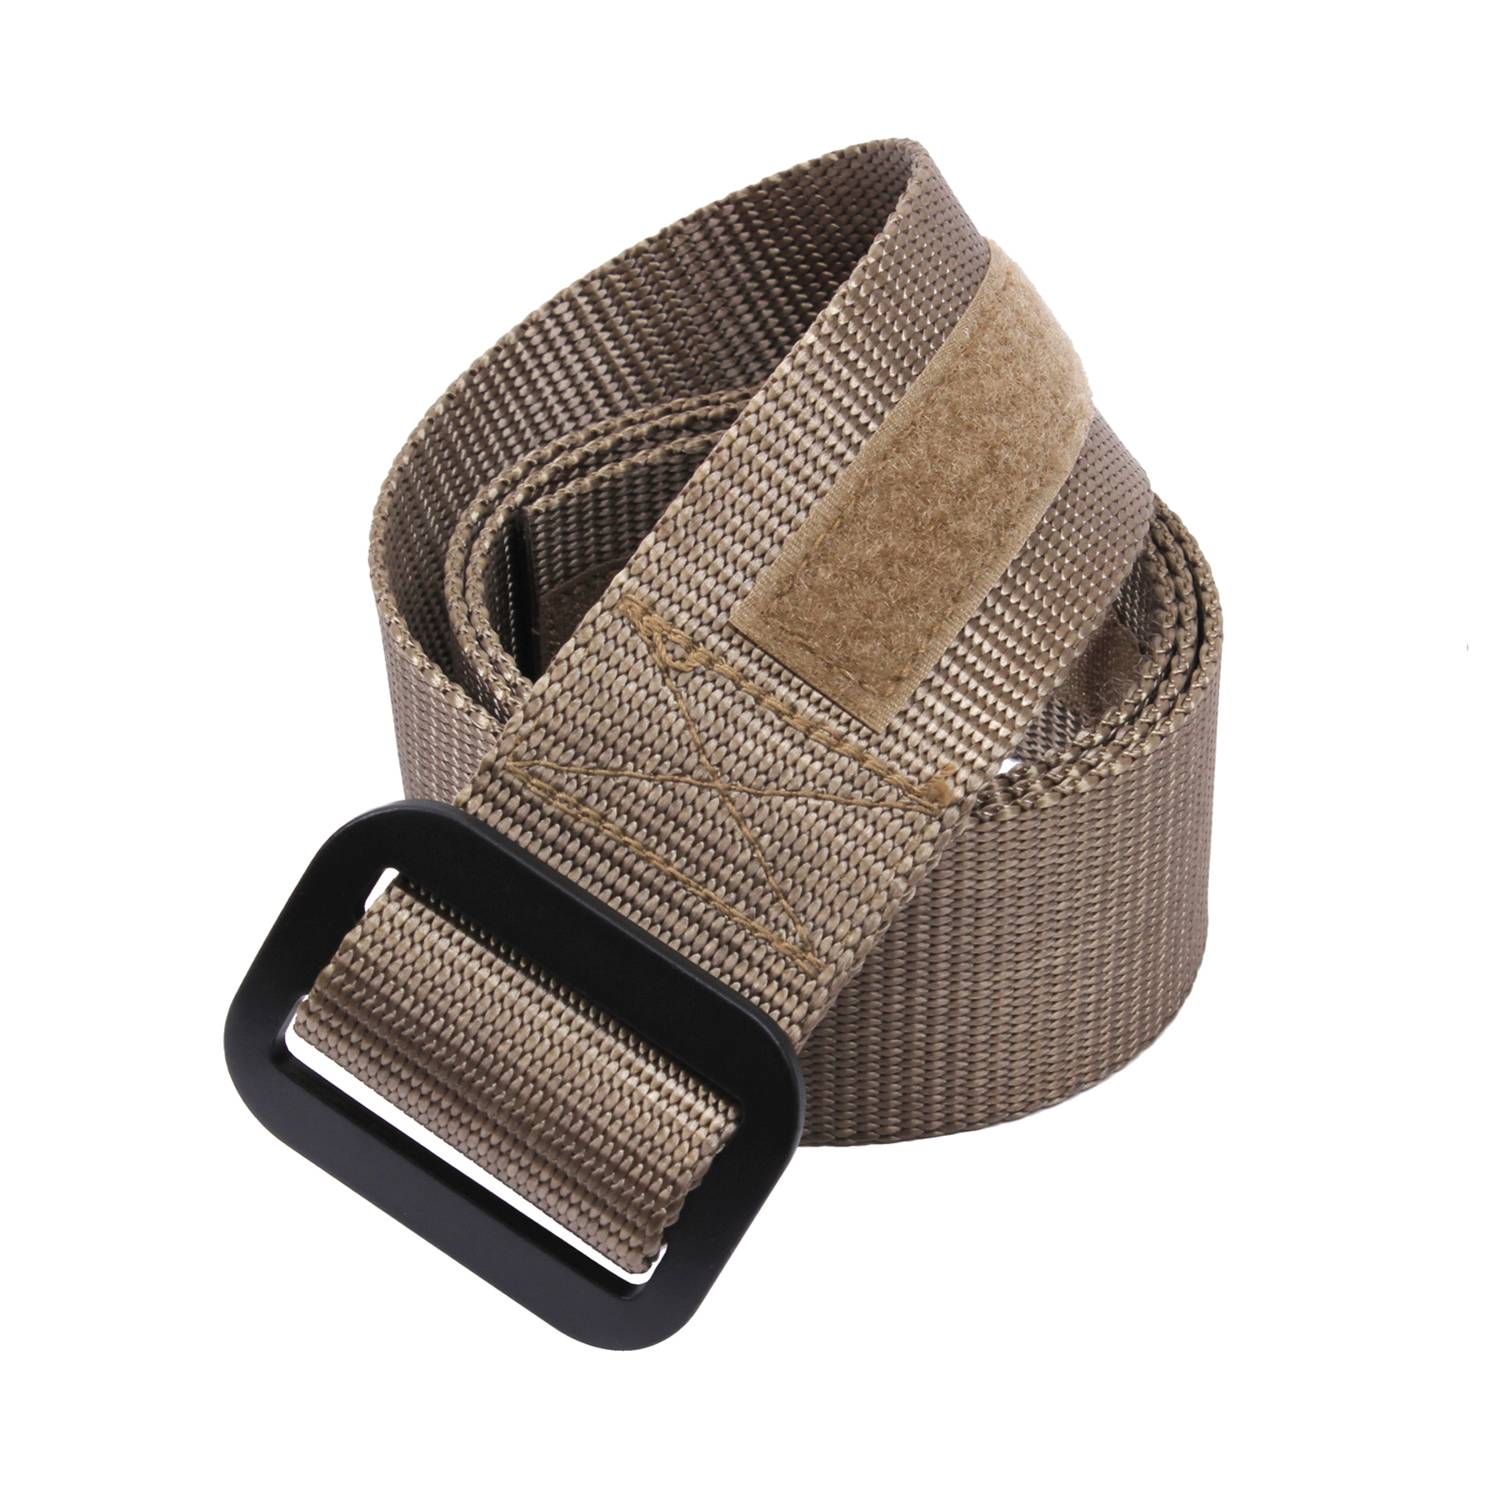 Rothco AR 670 1 Compliant Military Riggers Belt